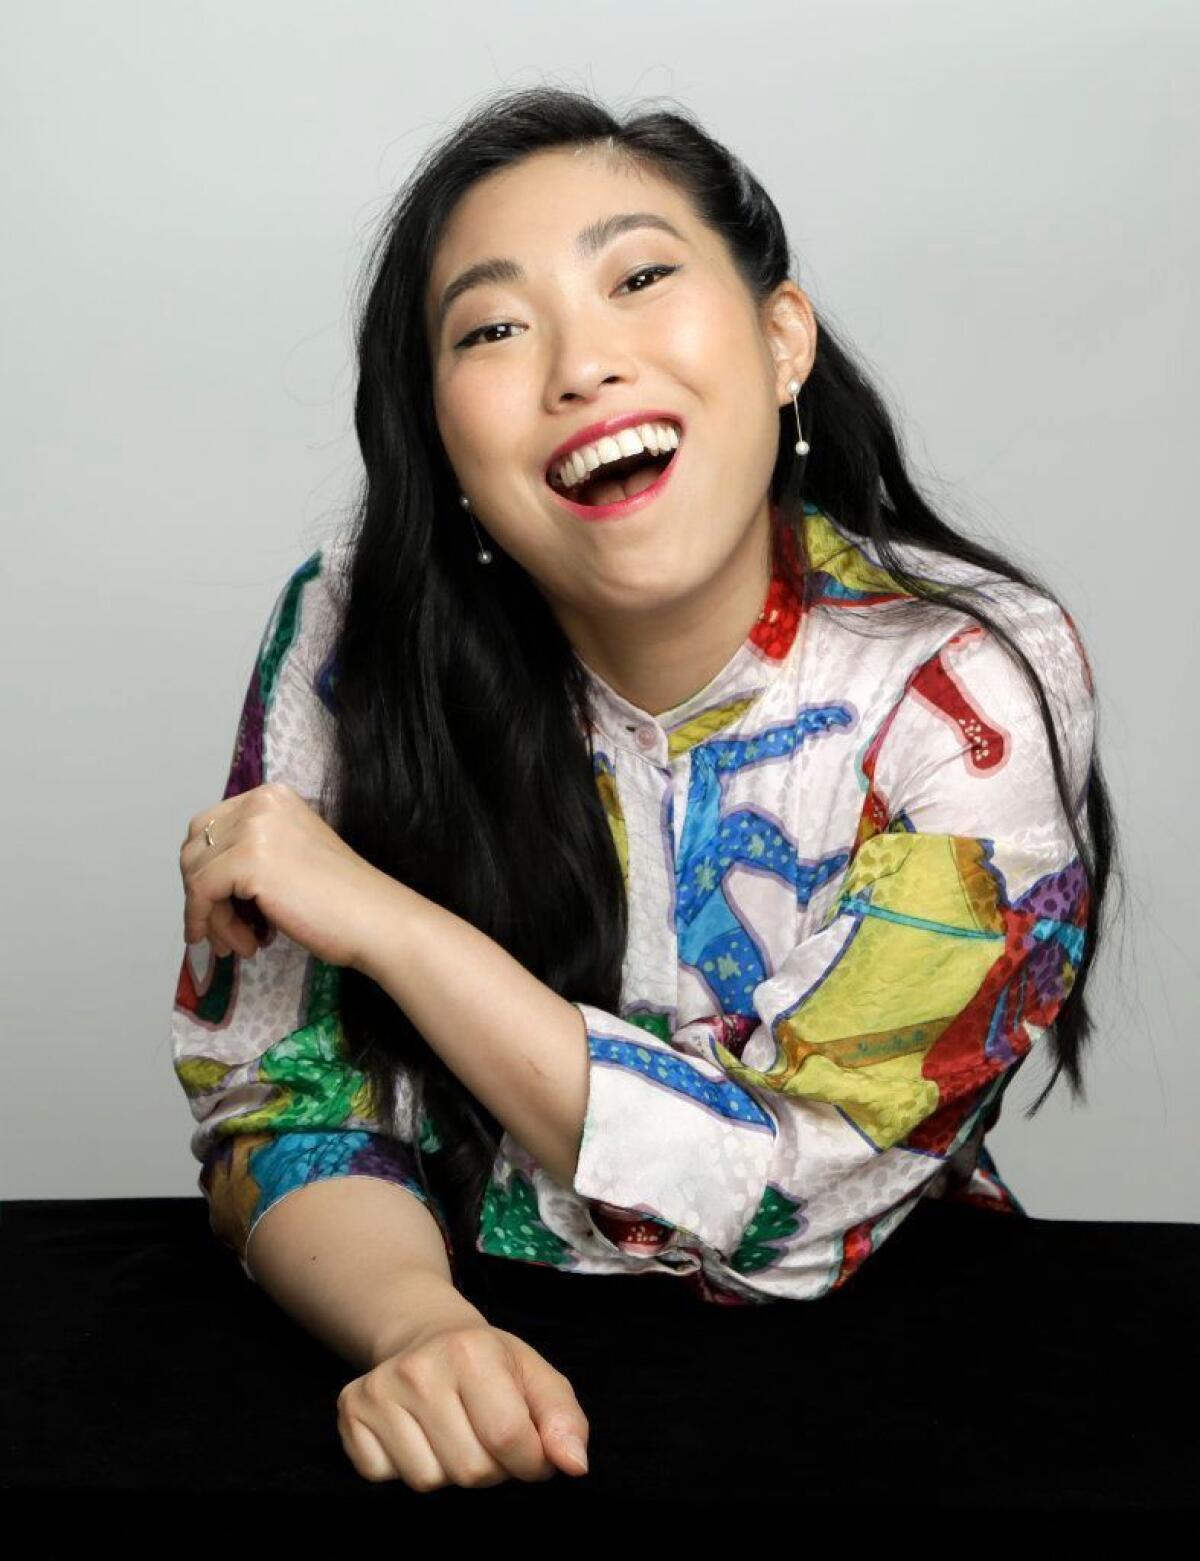 After opening "The Farewell" this summer, Lum will film her own Comedy Central TV series, "Awkwafina," with roles in Disney's "The Little Mermaid" and more on the horizon.